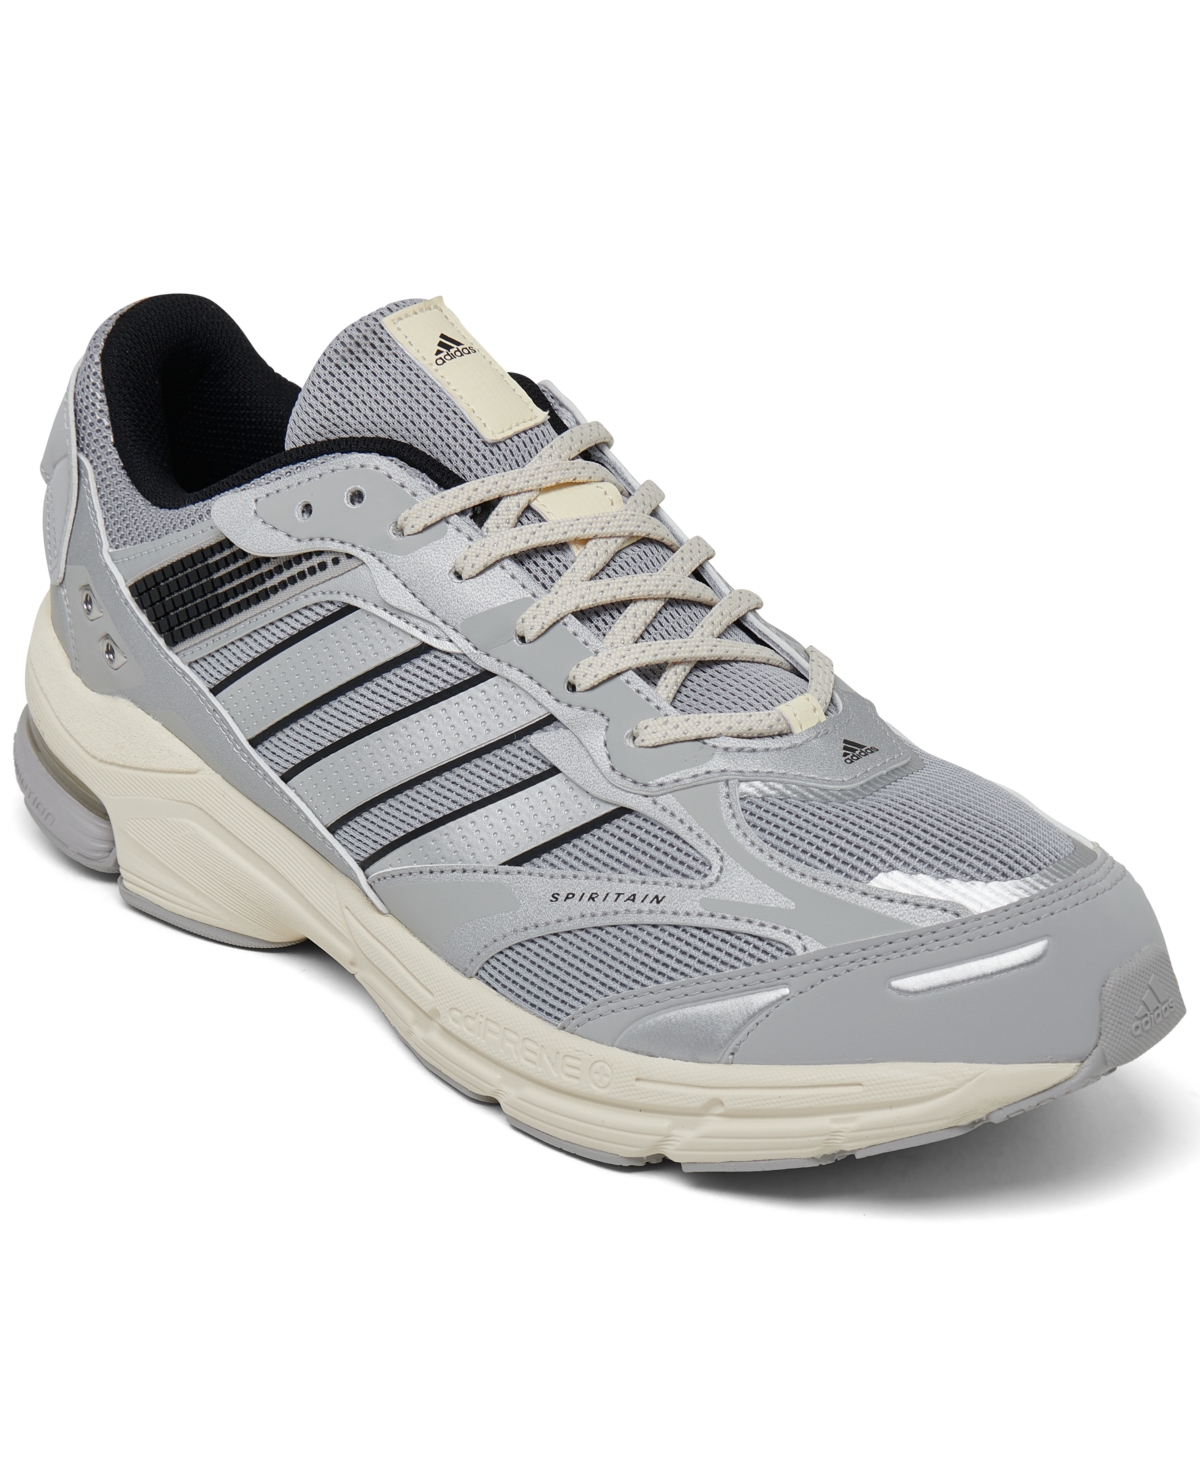 Adidas Originals Men's Spiritain 2000 Casual Sneakers From Finish Line In Matte Silver,silver,gray